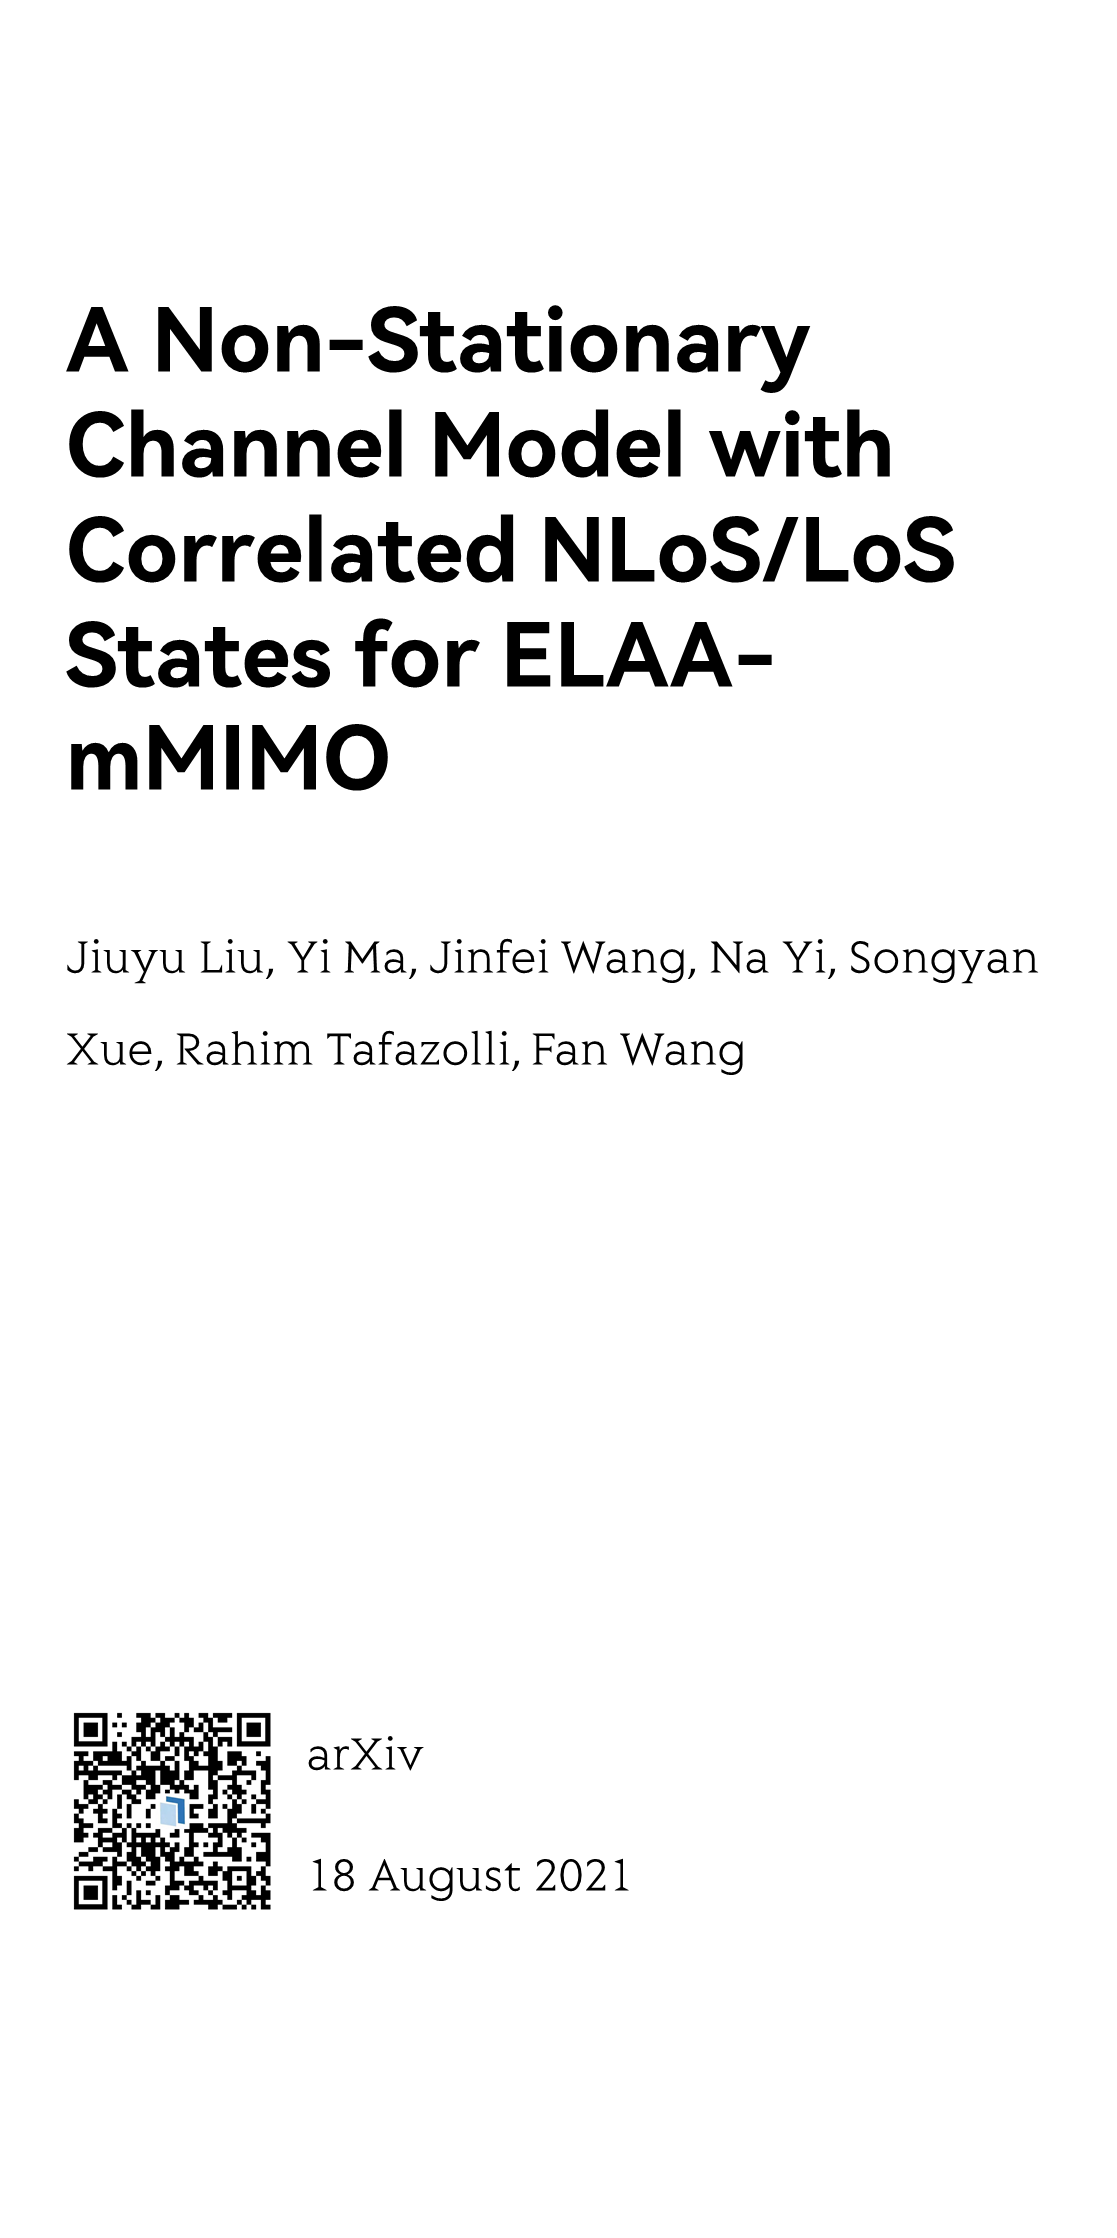 A Non-Stationary Channel Model with Correlated NLoS/LoS States for ELAA-mMIMO_1